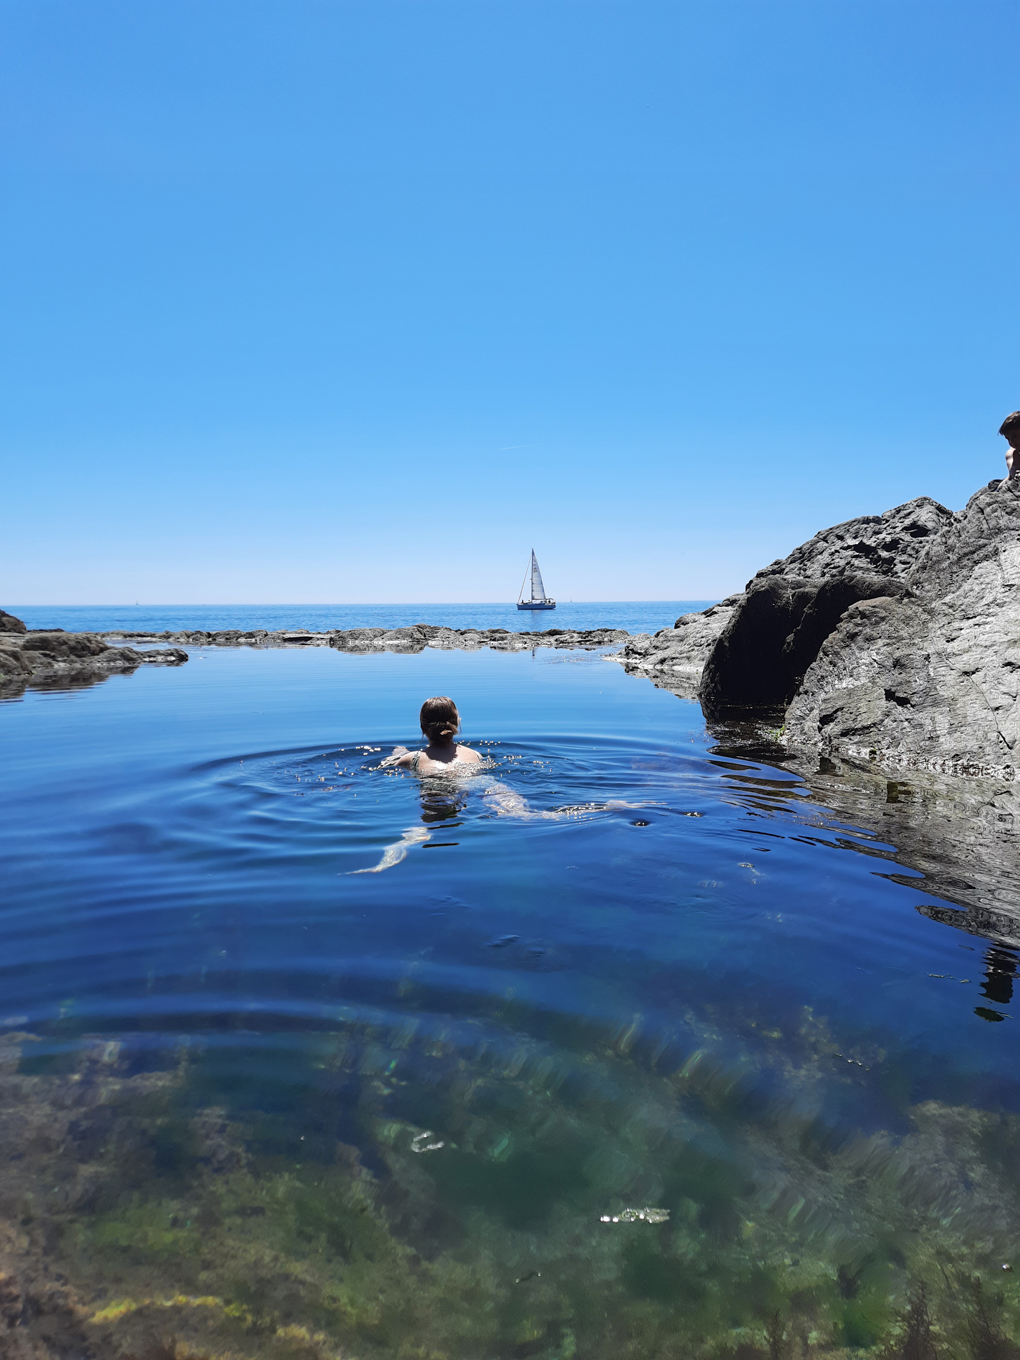 A woman swimming away from the camera in a still sea pool. In the background, a sailing ship passes by.